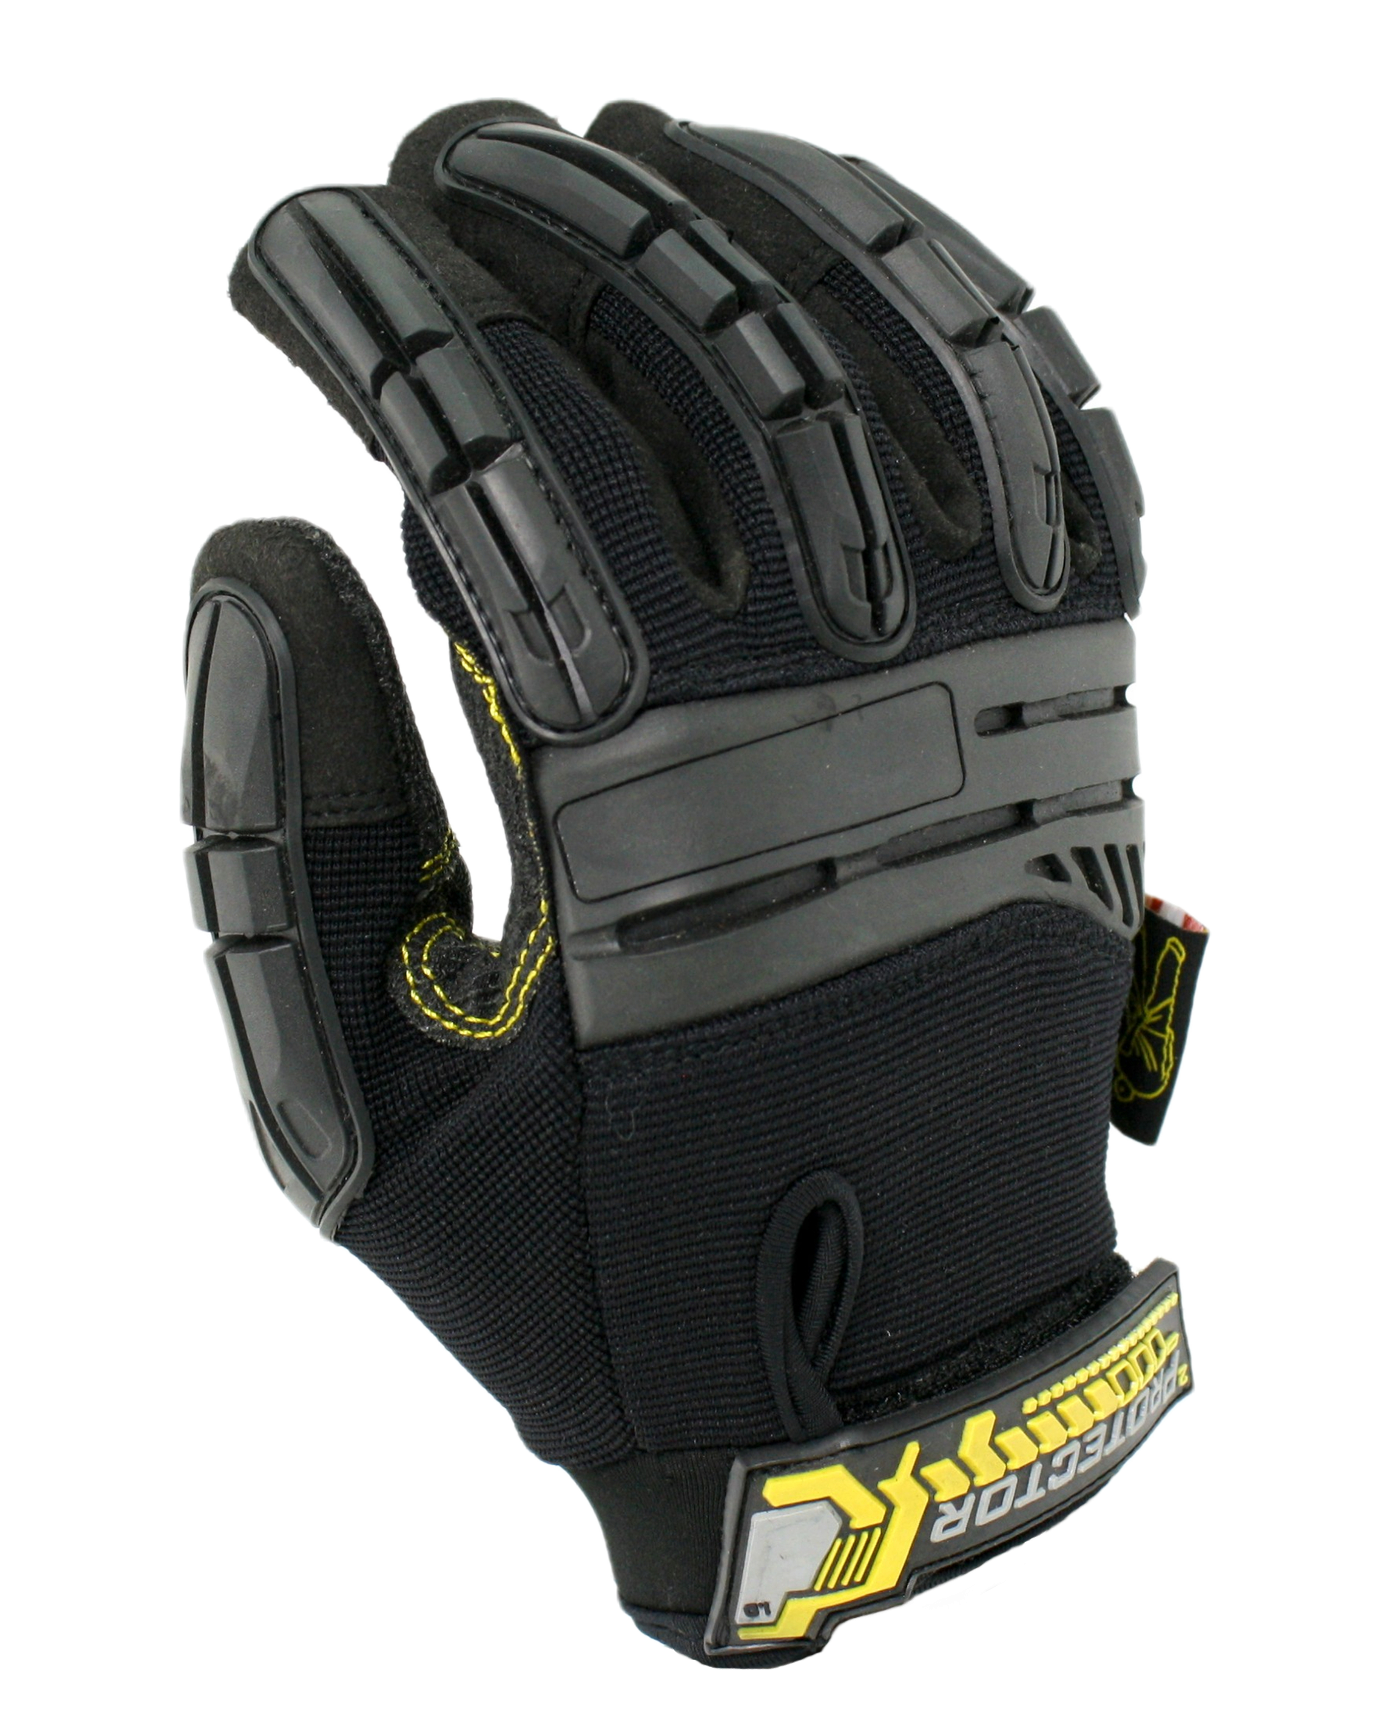 Protector™ 3.0 Heavy Duty Rigger Glove - Dirty Rigger®